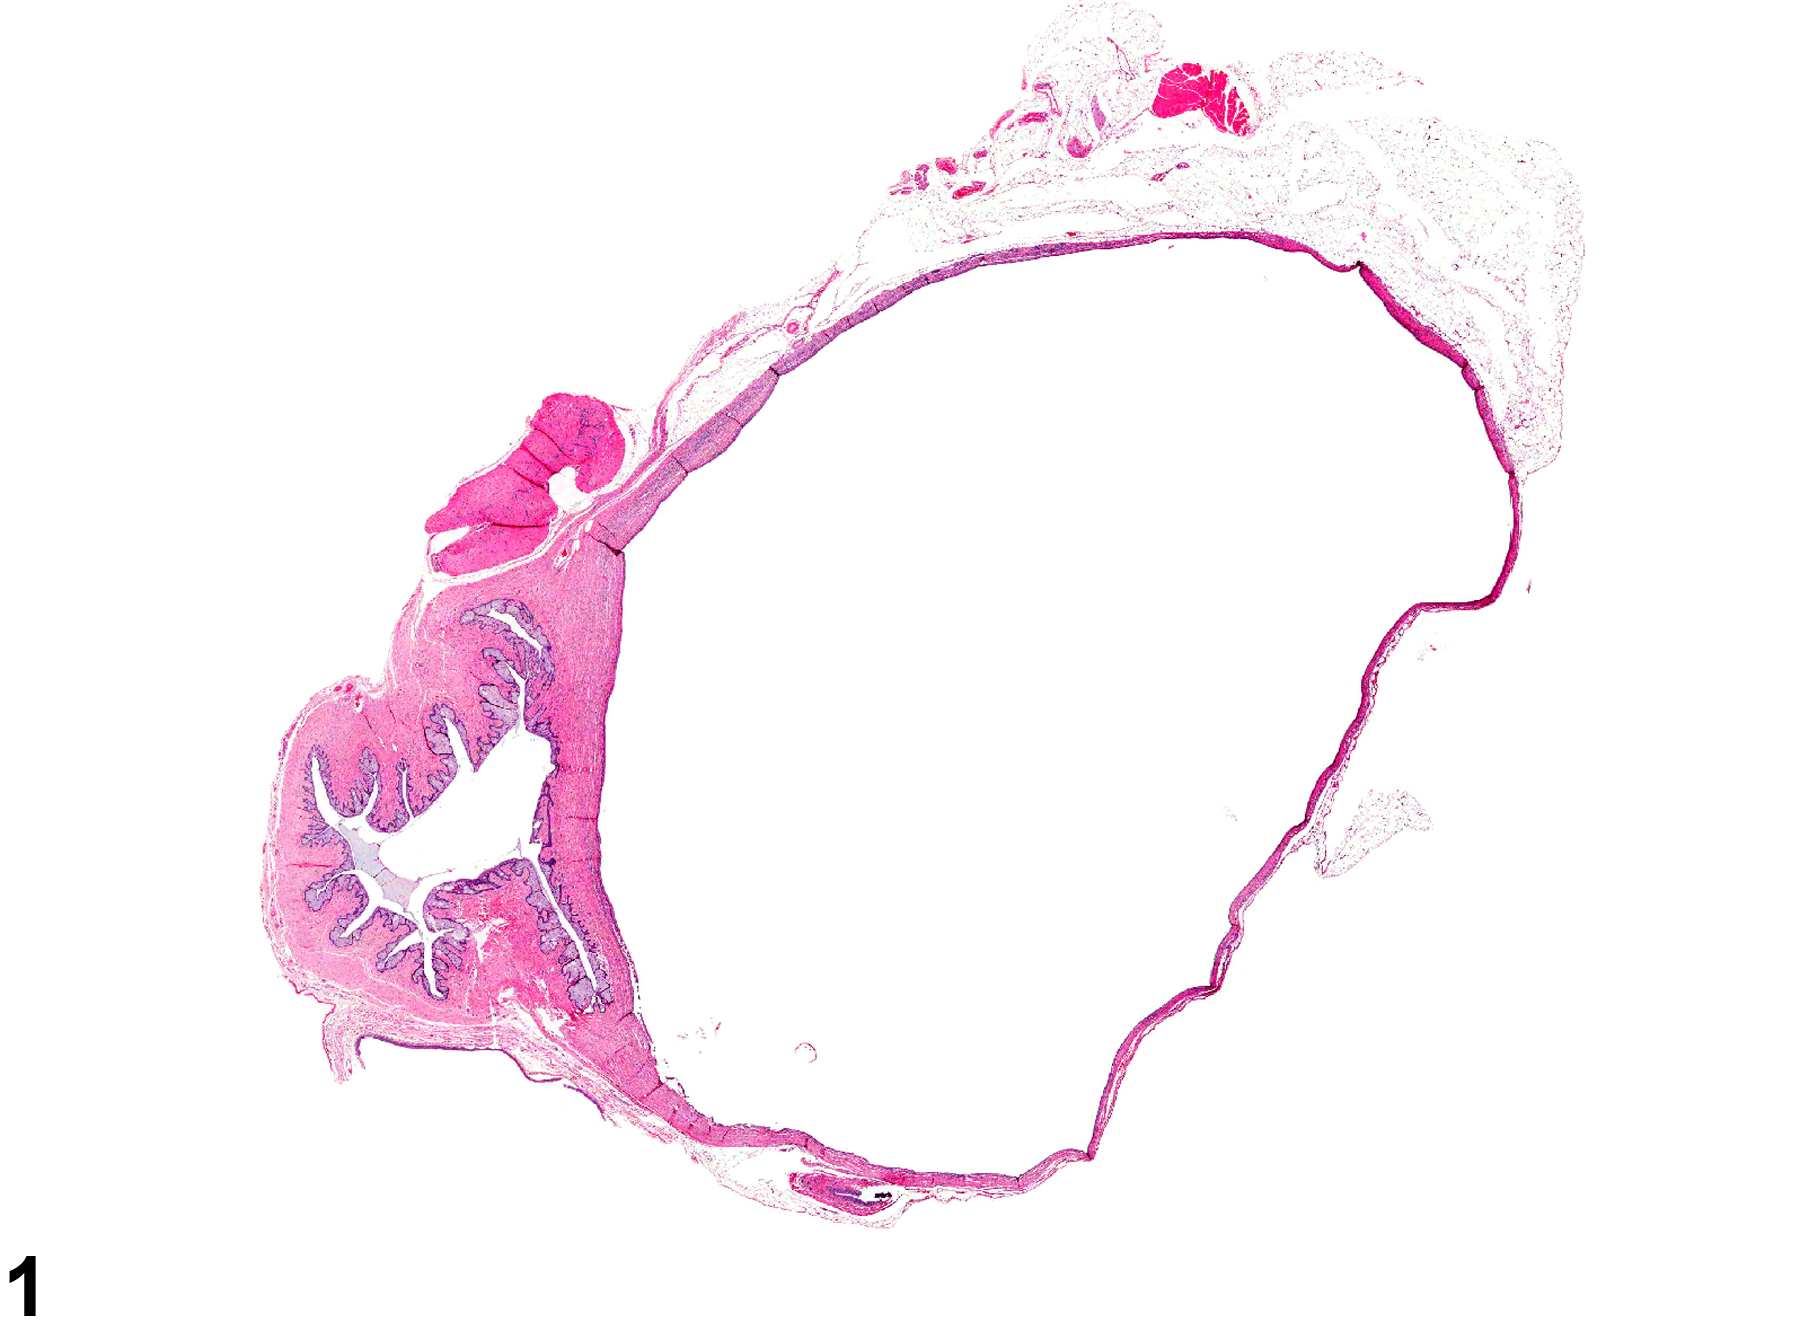 Image of dilation in the vagina from a female F344/N rat in a chronic study